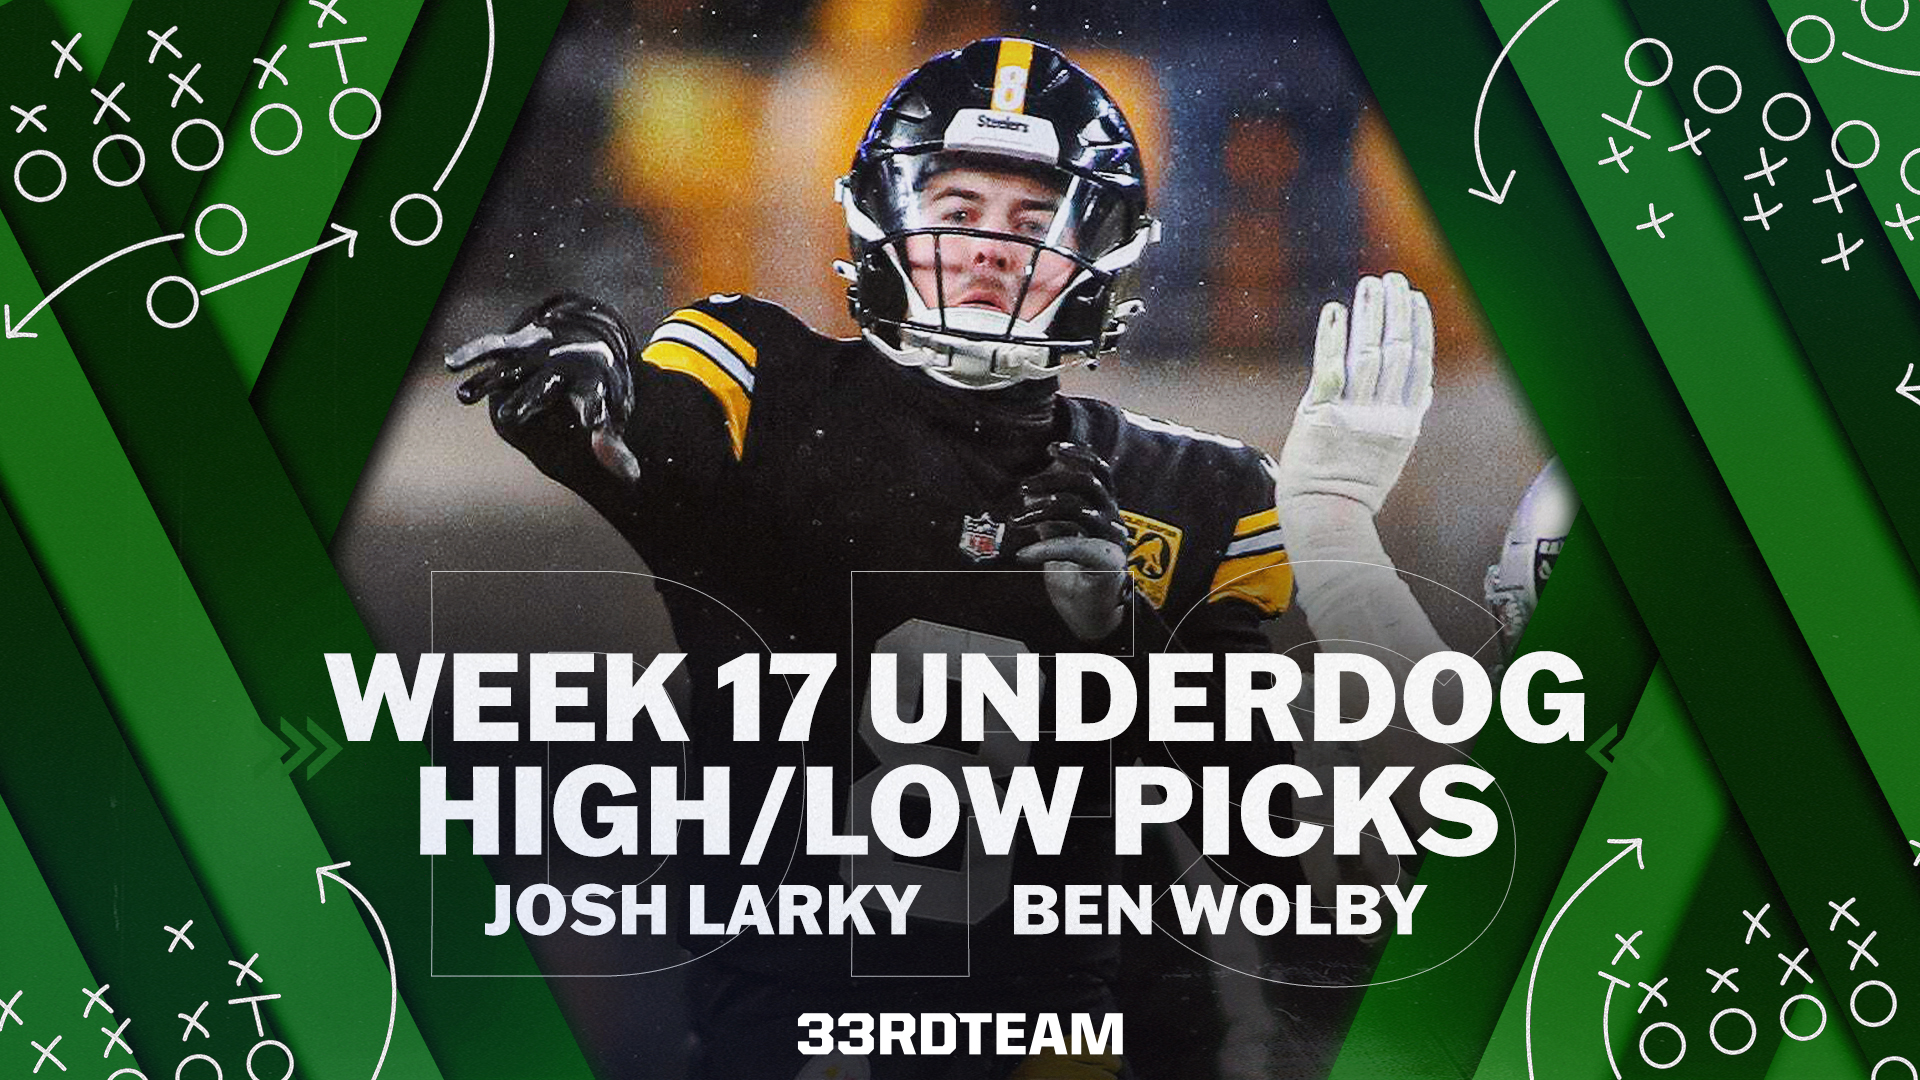 Week 17 Underdog High/Low Picks from Larky & Wolby